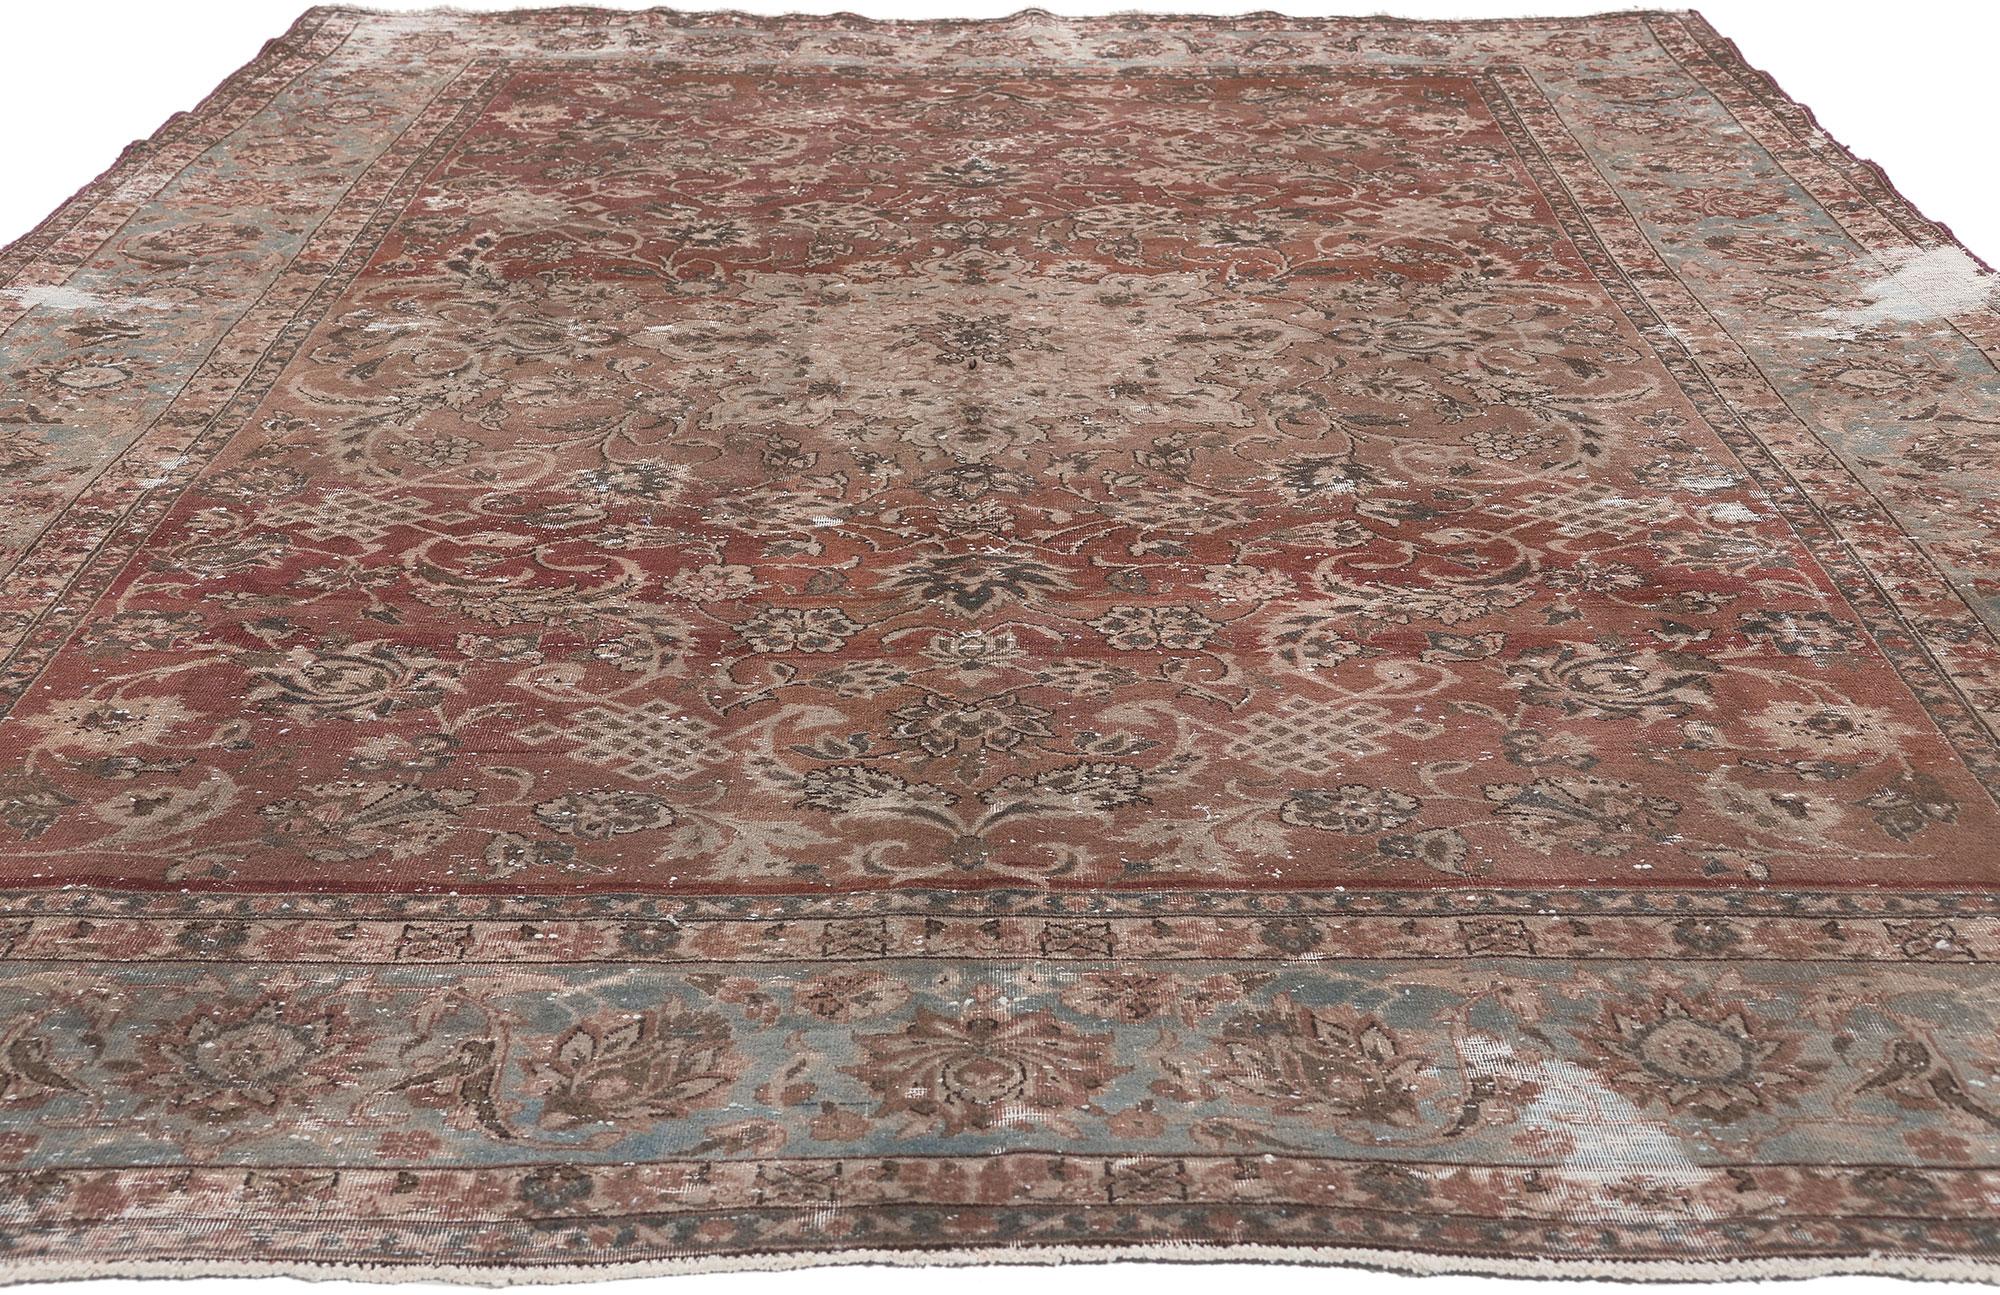 Hand-Knotted Distressed Antique Persian Tabriz Rug with Rustic Earth-Tone Colors For Sale